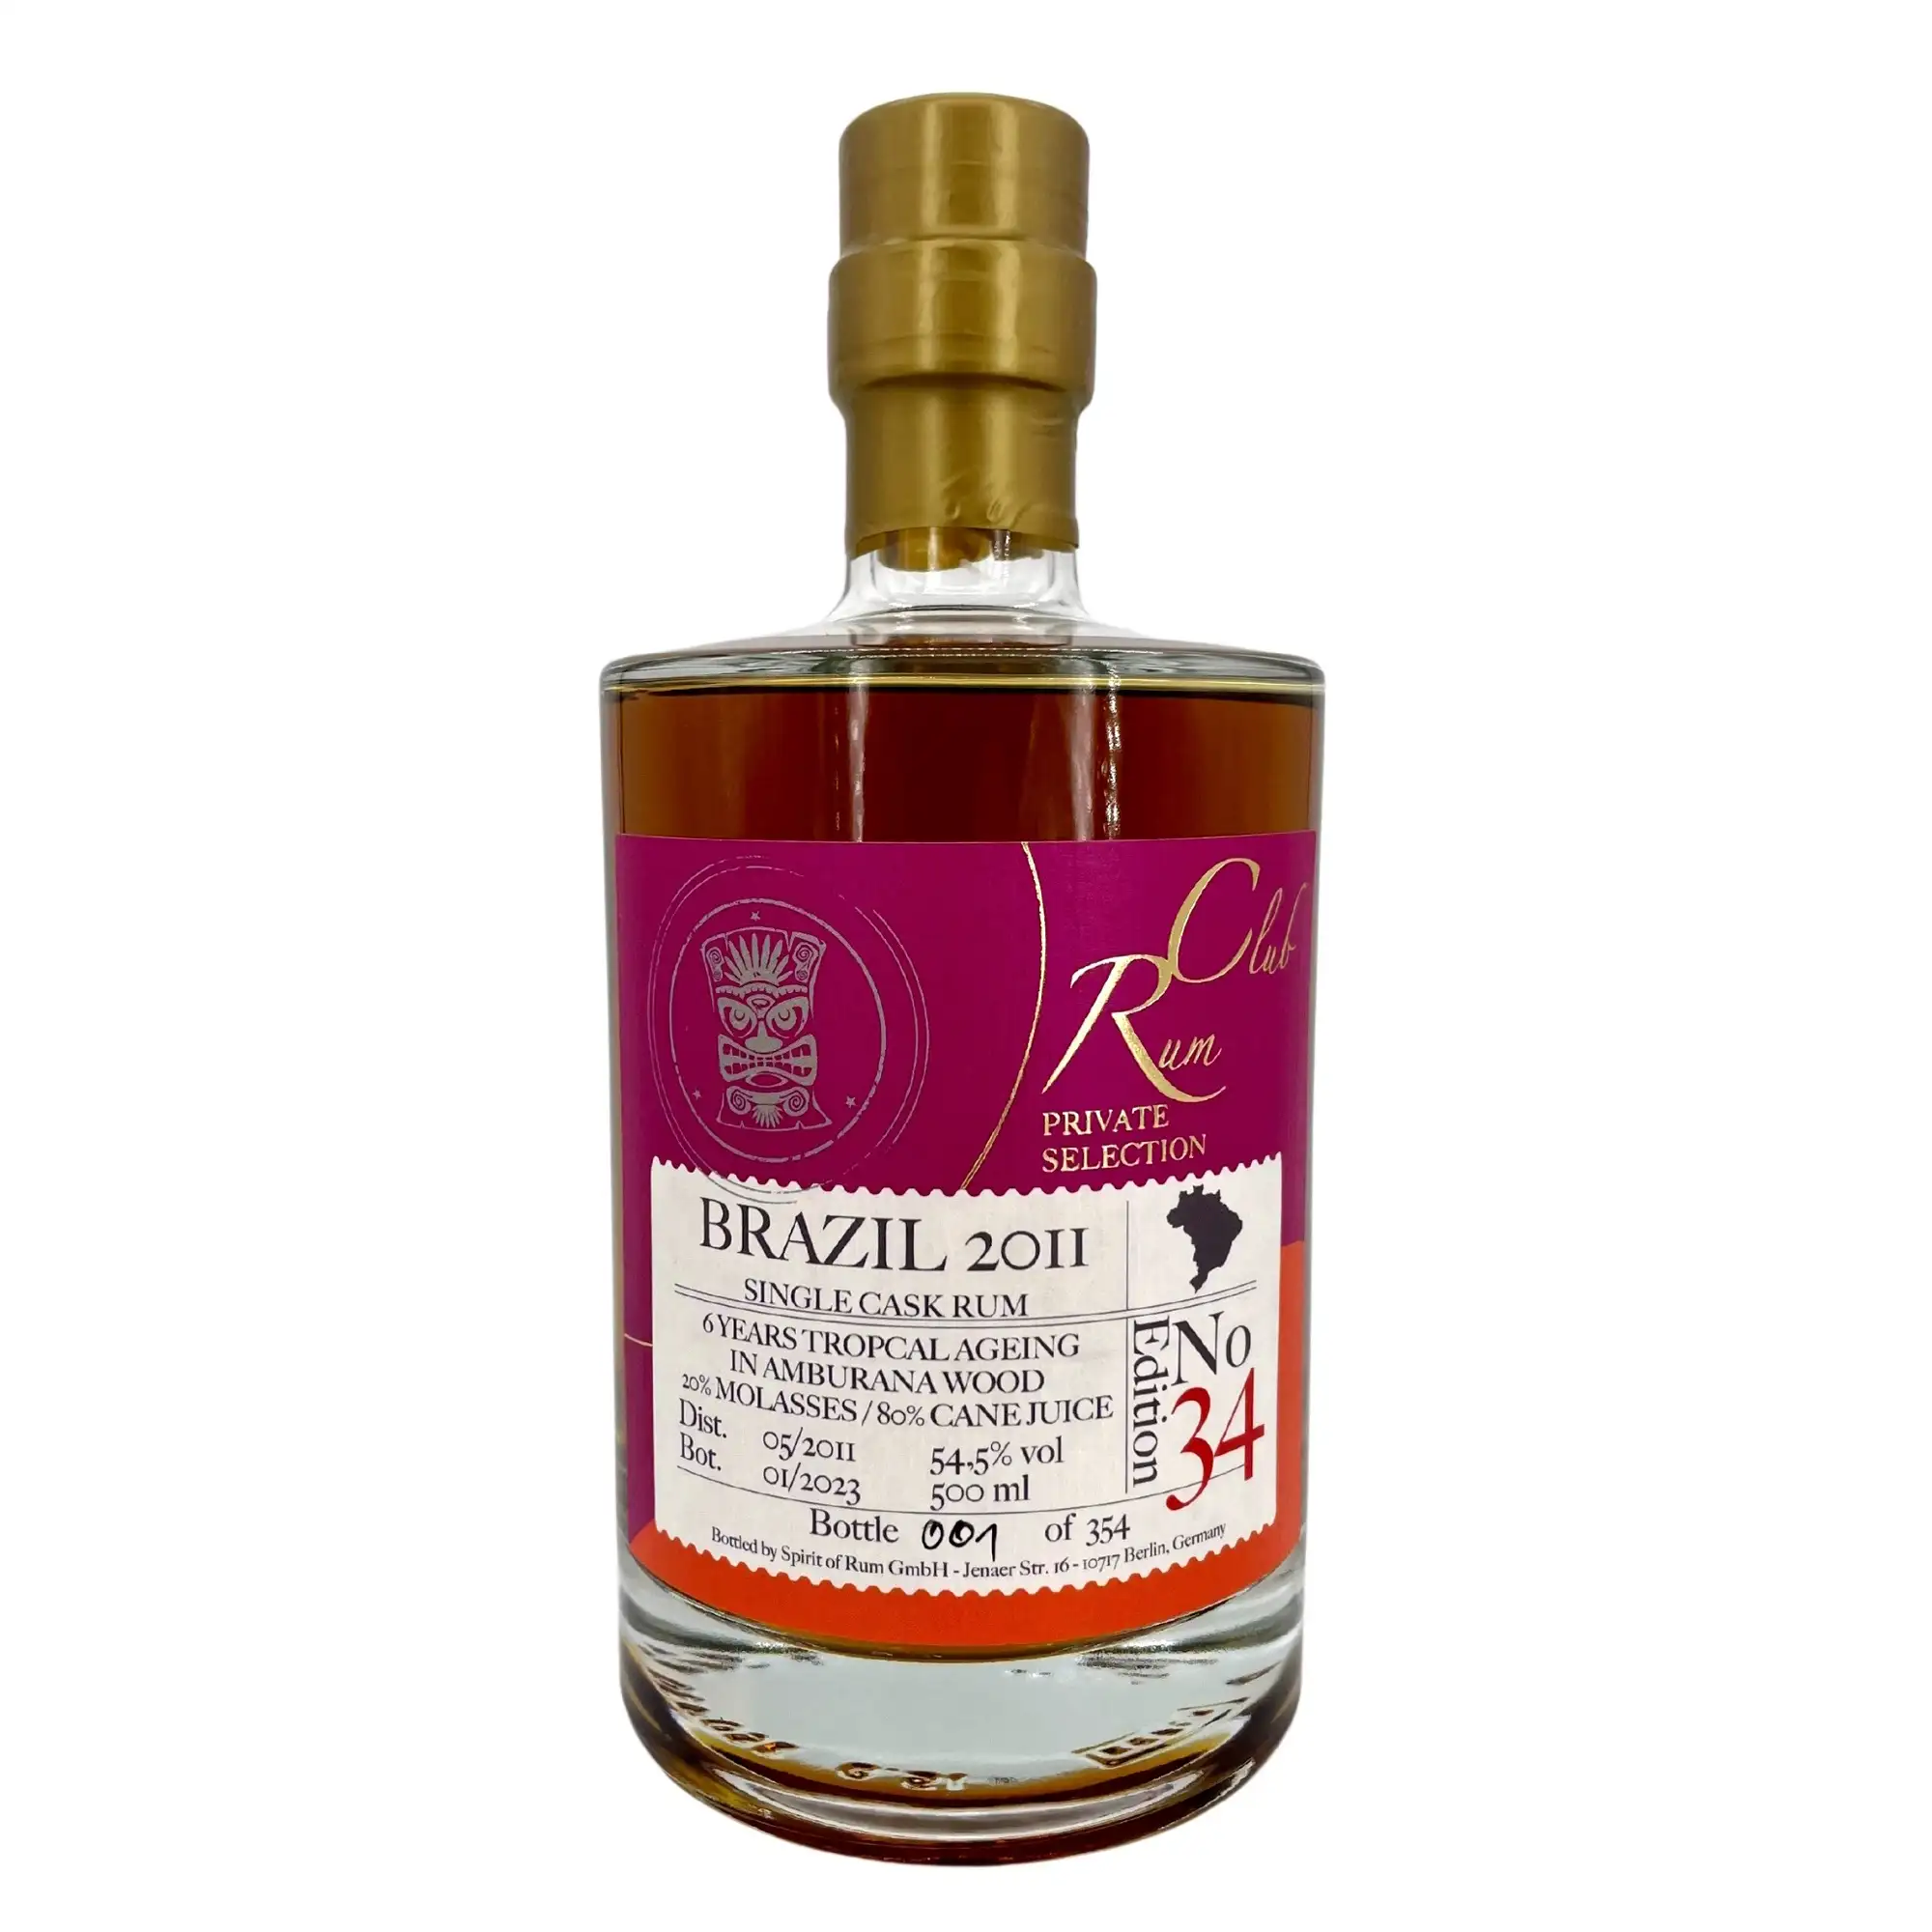 Image of the front of the bottle of the rum Rumclub Private Selection Ed. 34